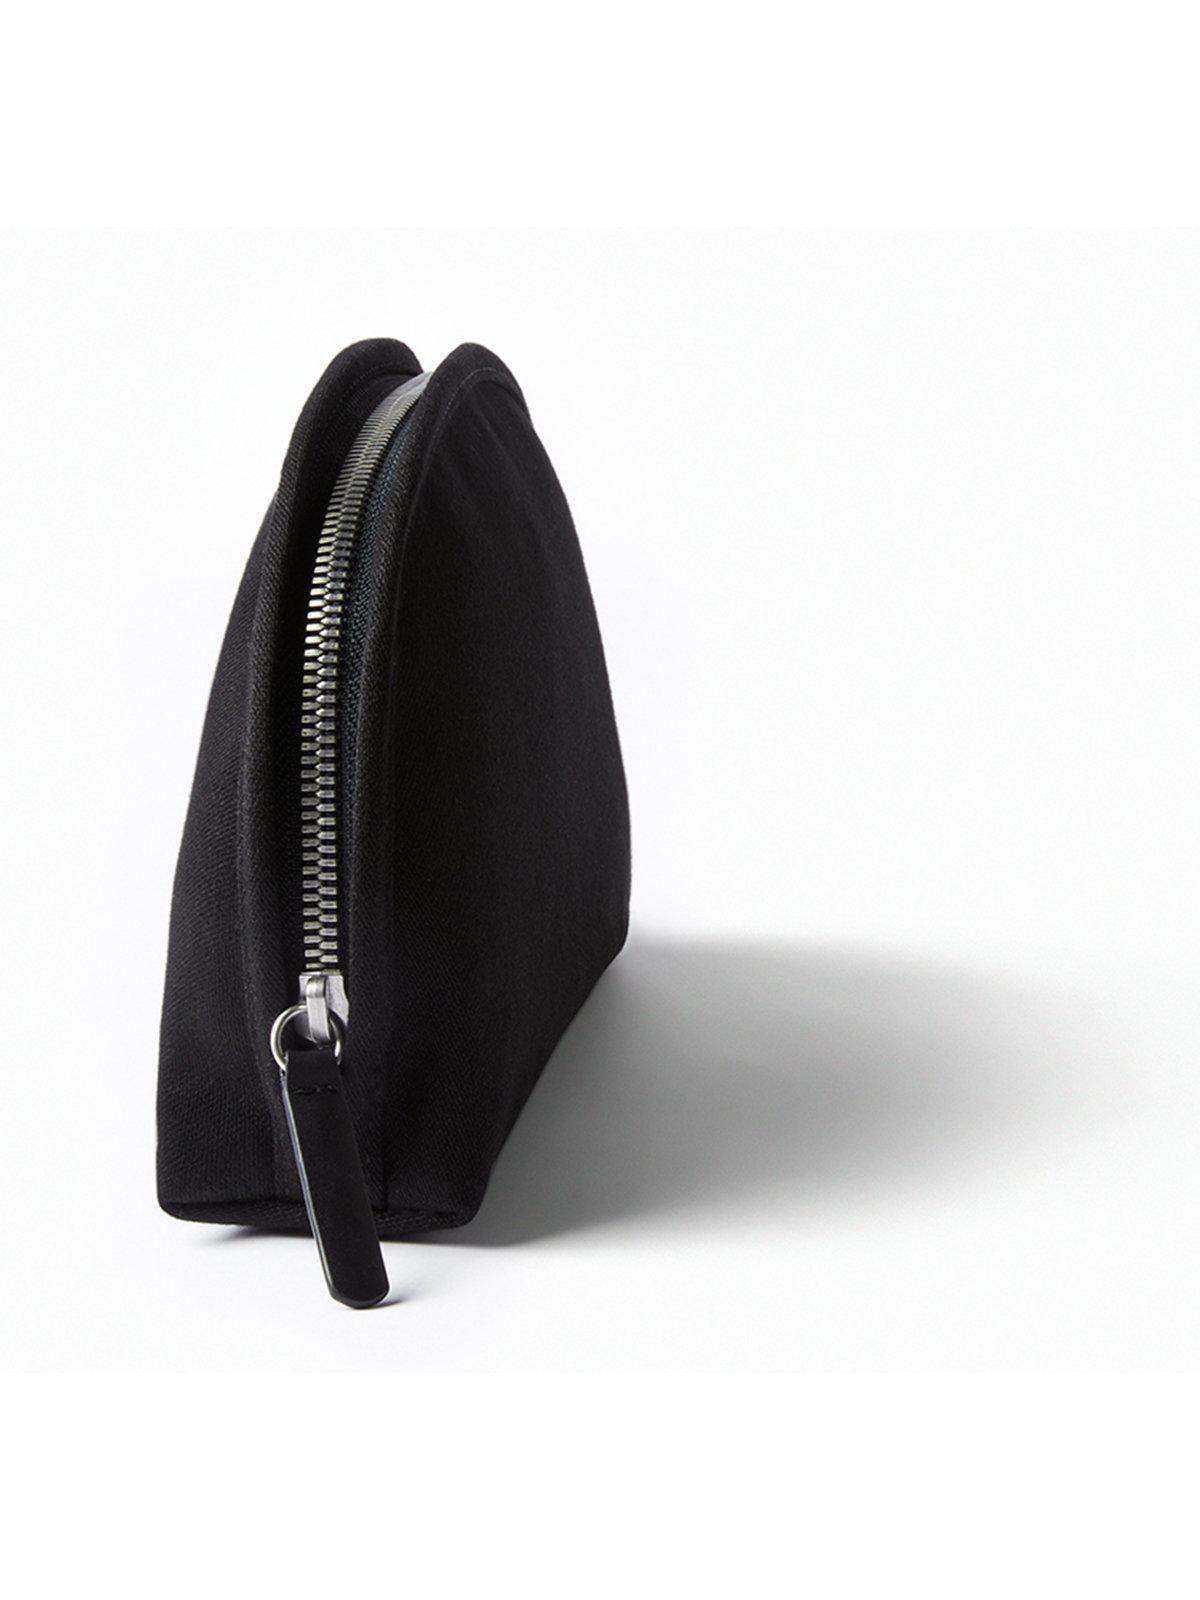 Bellroy Classic Pouch Melbourne Black Recycled